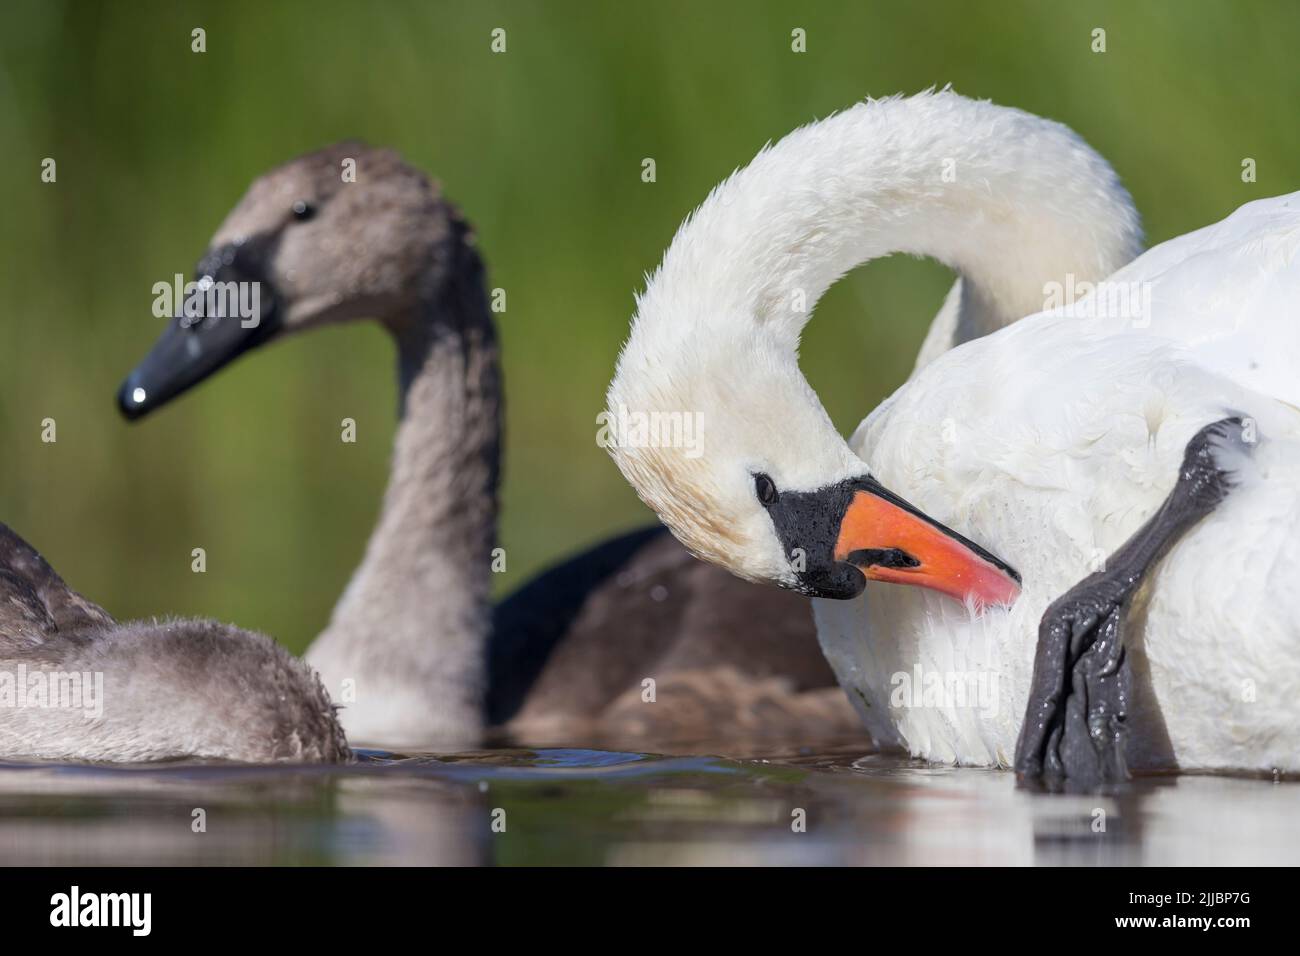 Mute swan Cygnus olor, adult, preening with chick in background, Tiszaalpár, Hungary, July Stock Photo